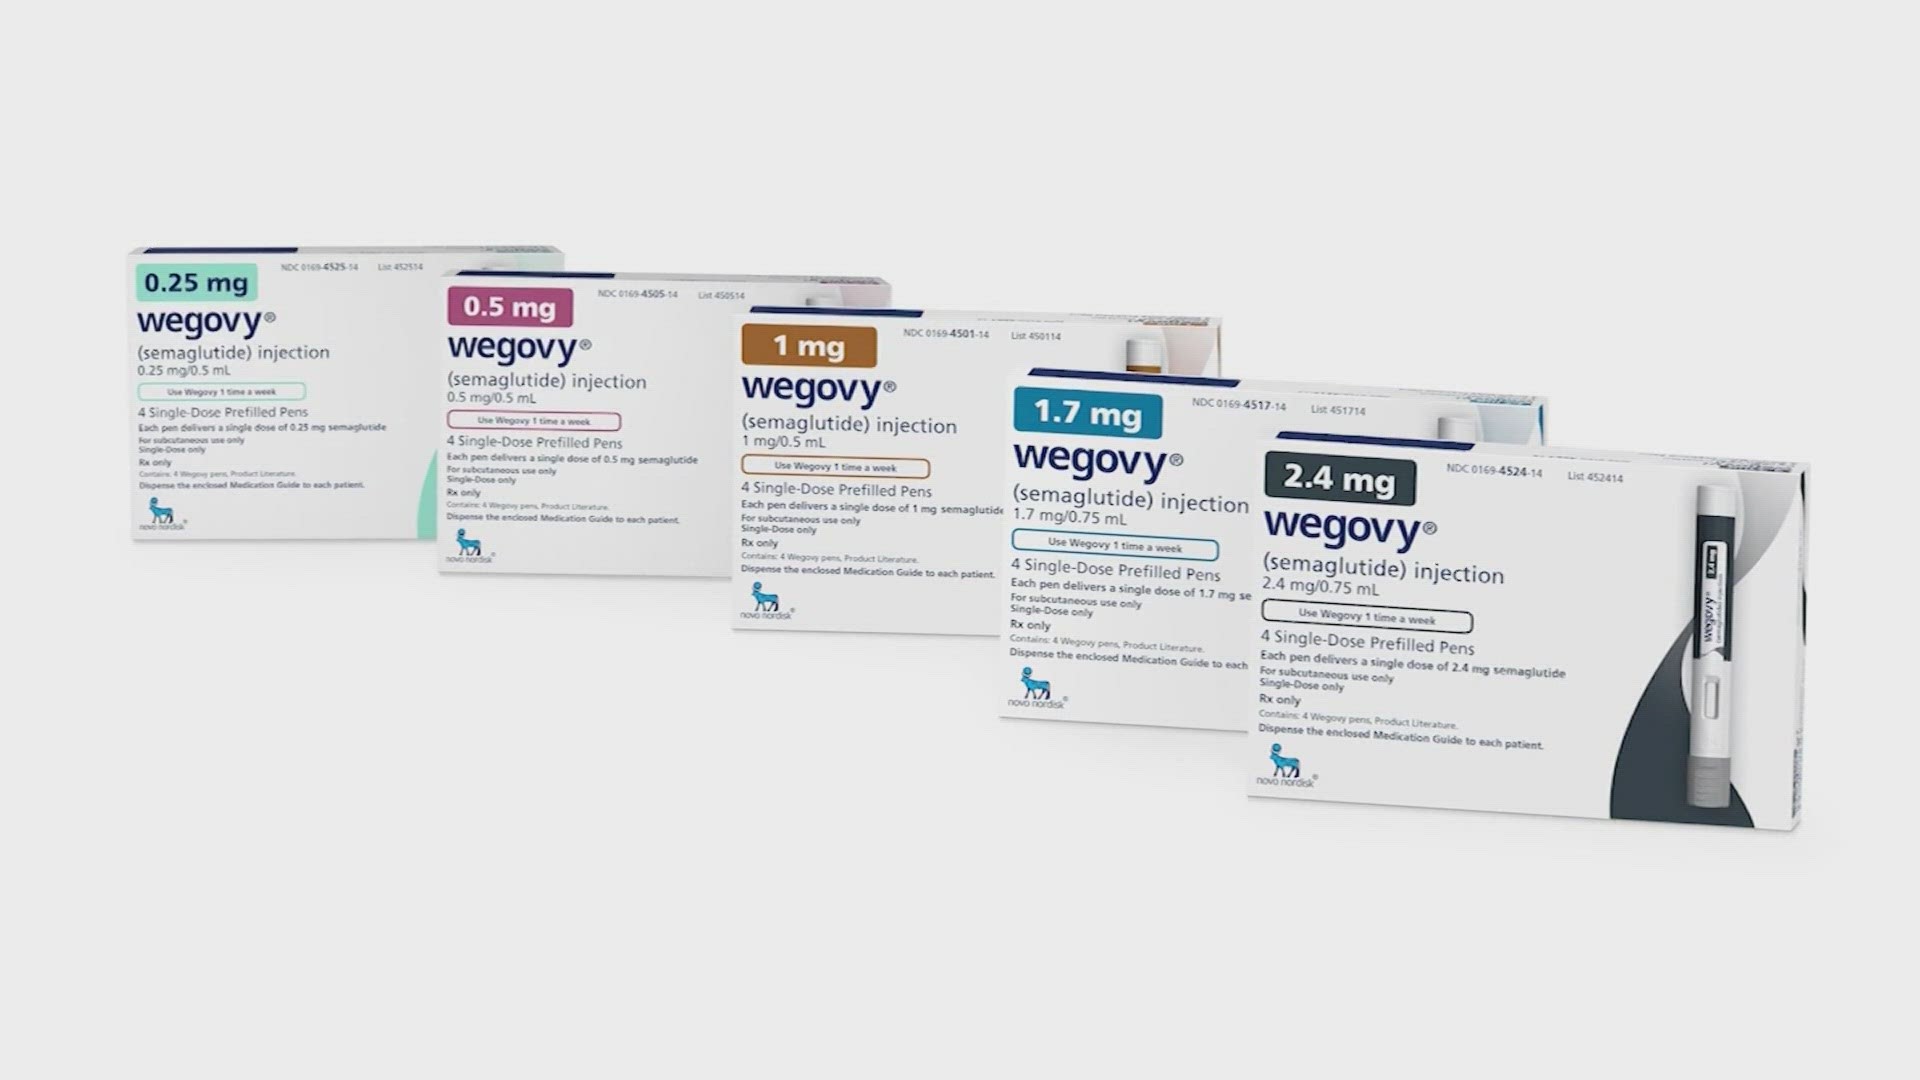 Prescriptions for weight loss medicines Ozempic and Wegovy are soaring. The FDA has updated the label for Ozempic to acknowledge reports of blocked intestines.